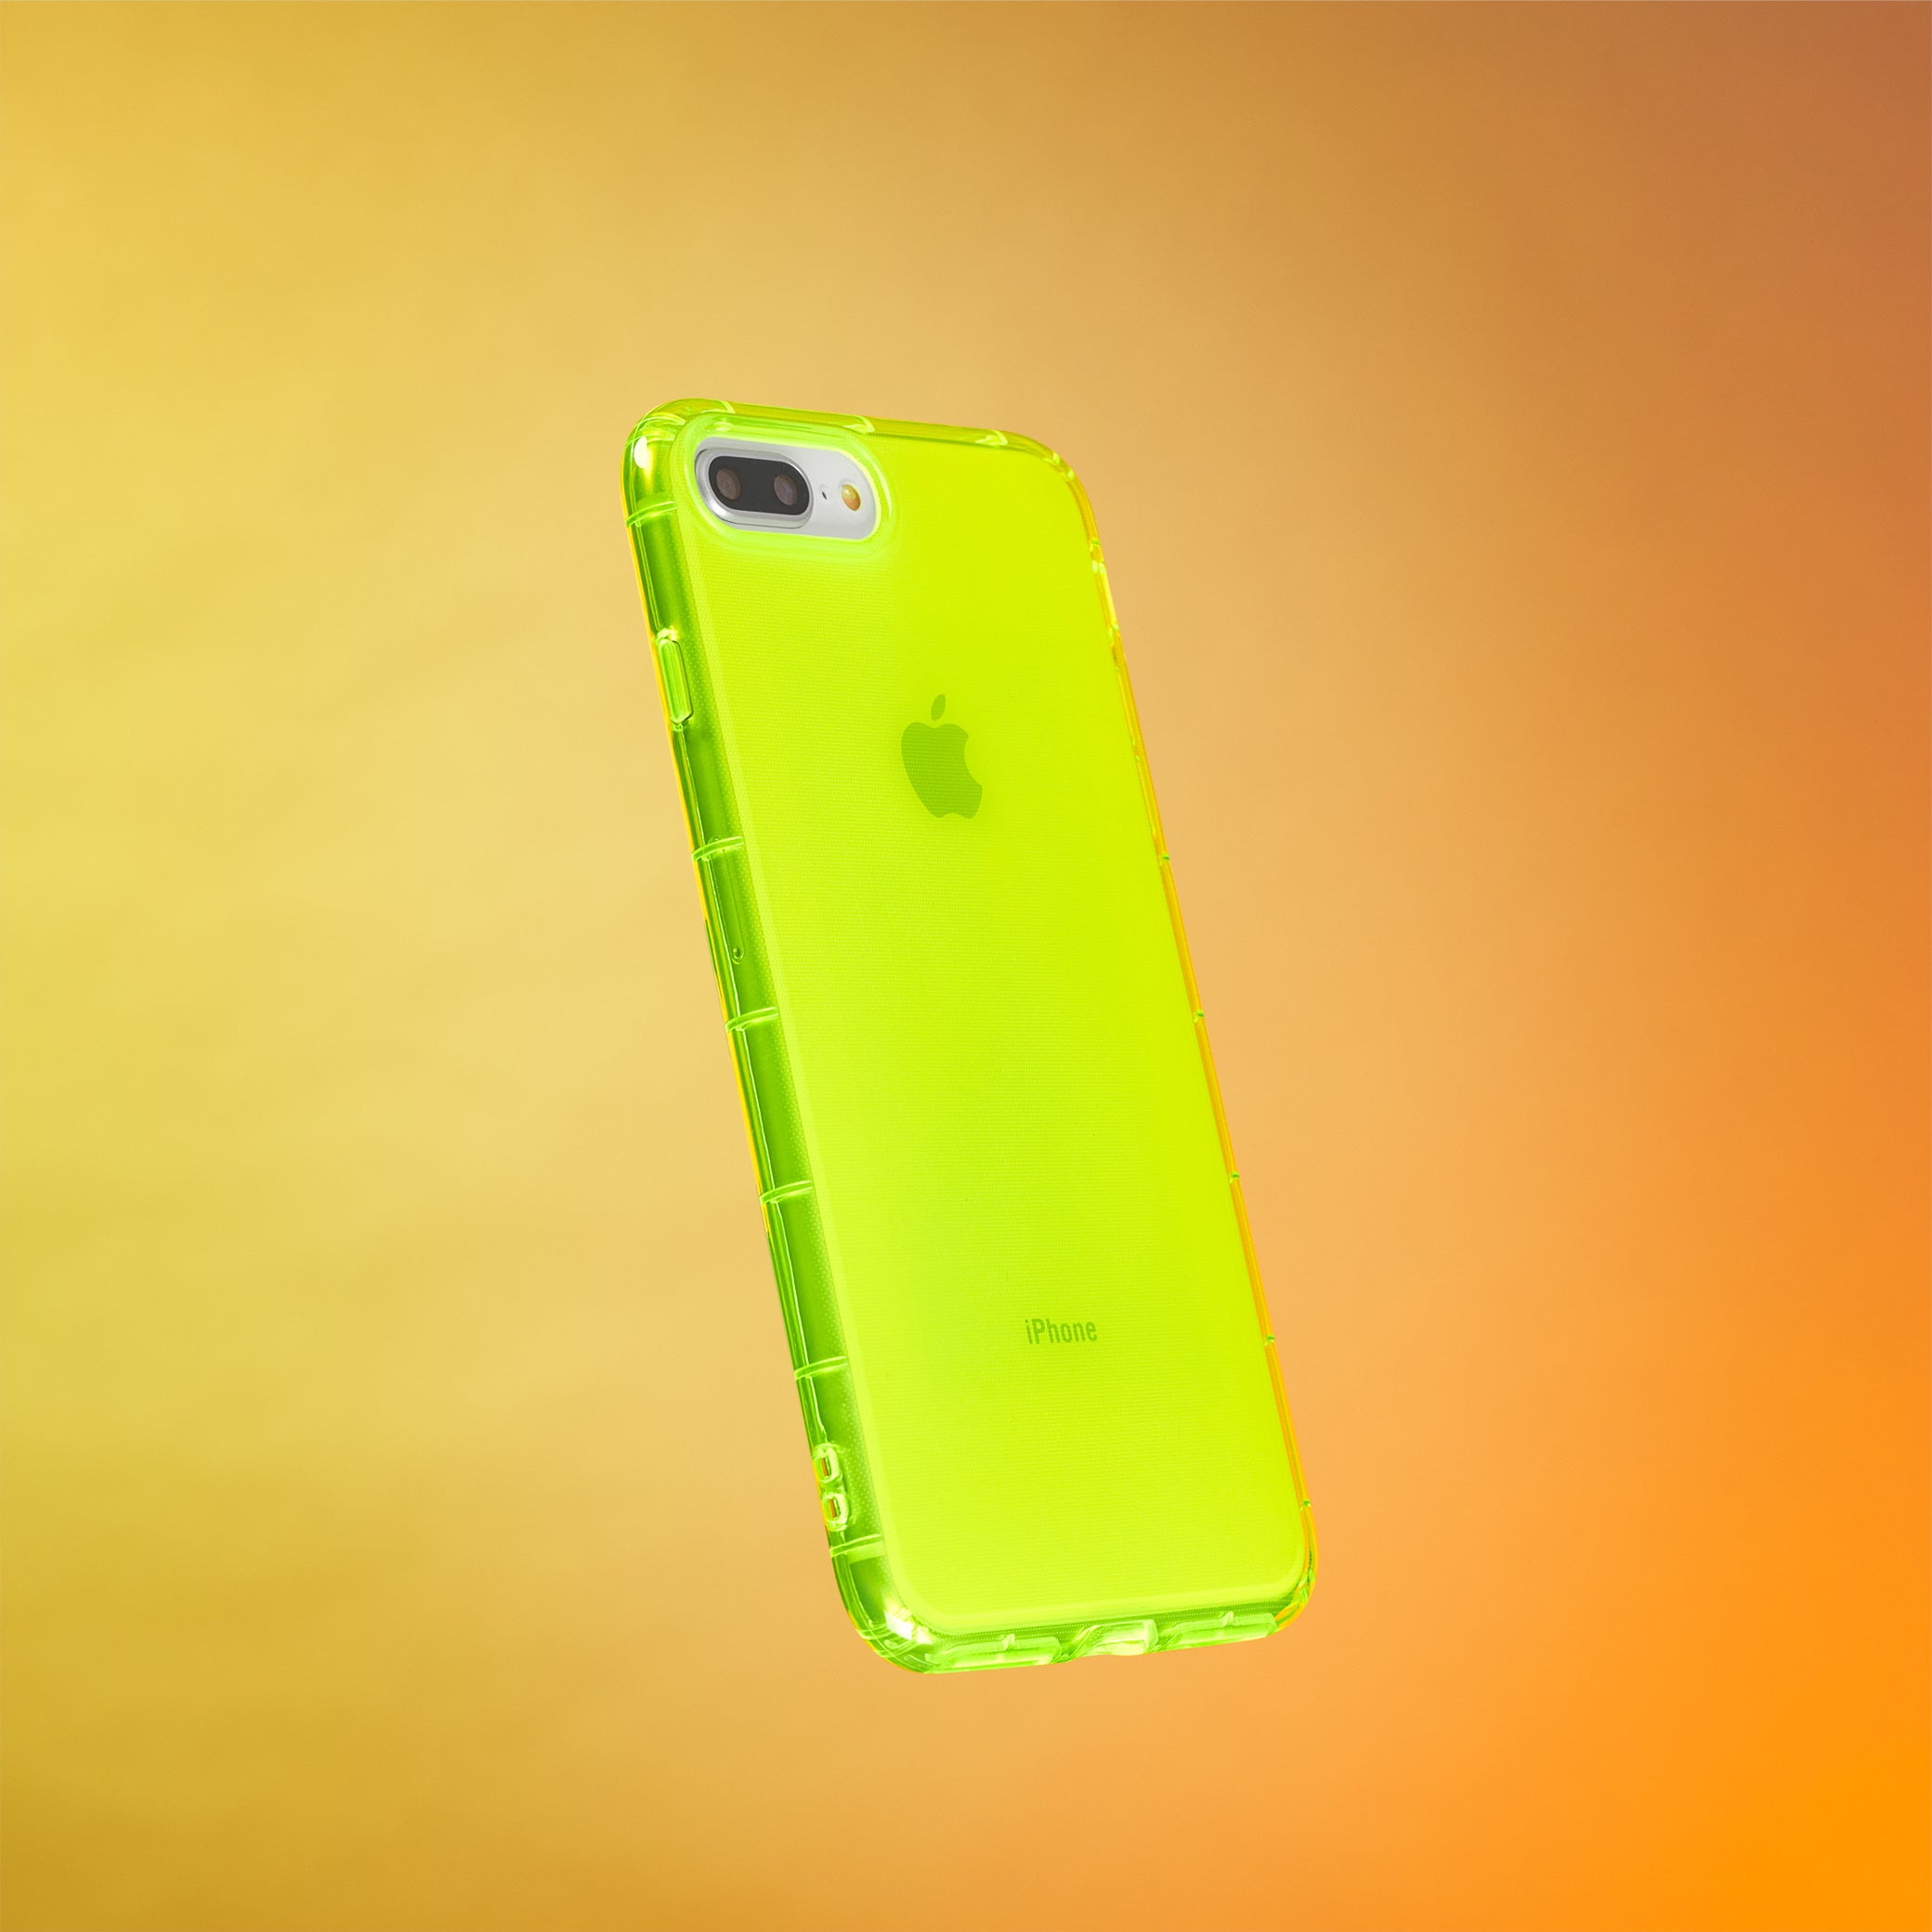 Highlighter Case for iPhone 8 Plus & iPhone 7 Plus - Conspicuous Neon Yellow